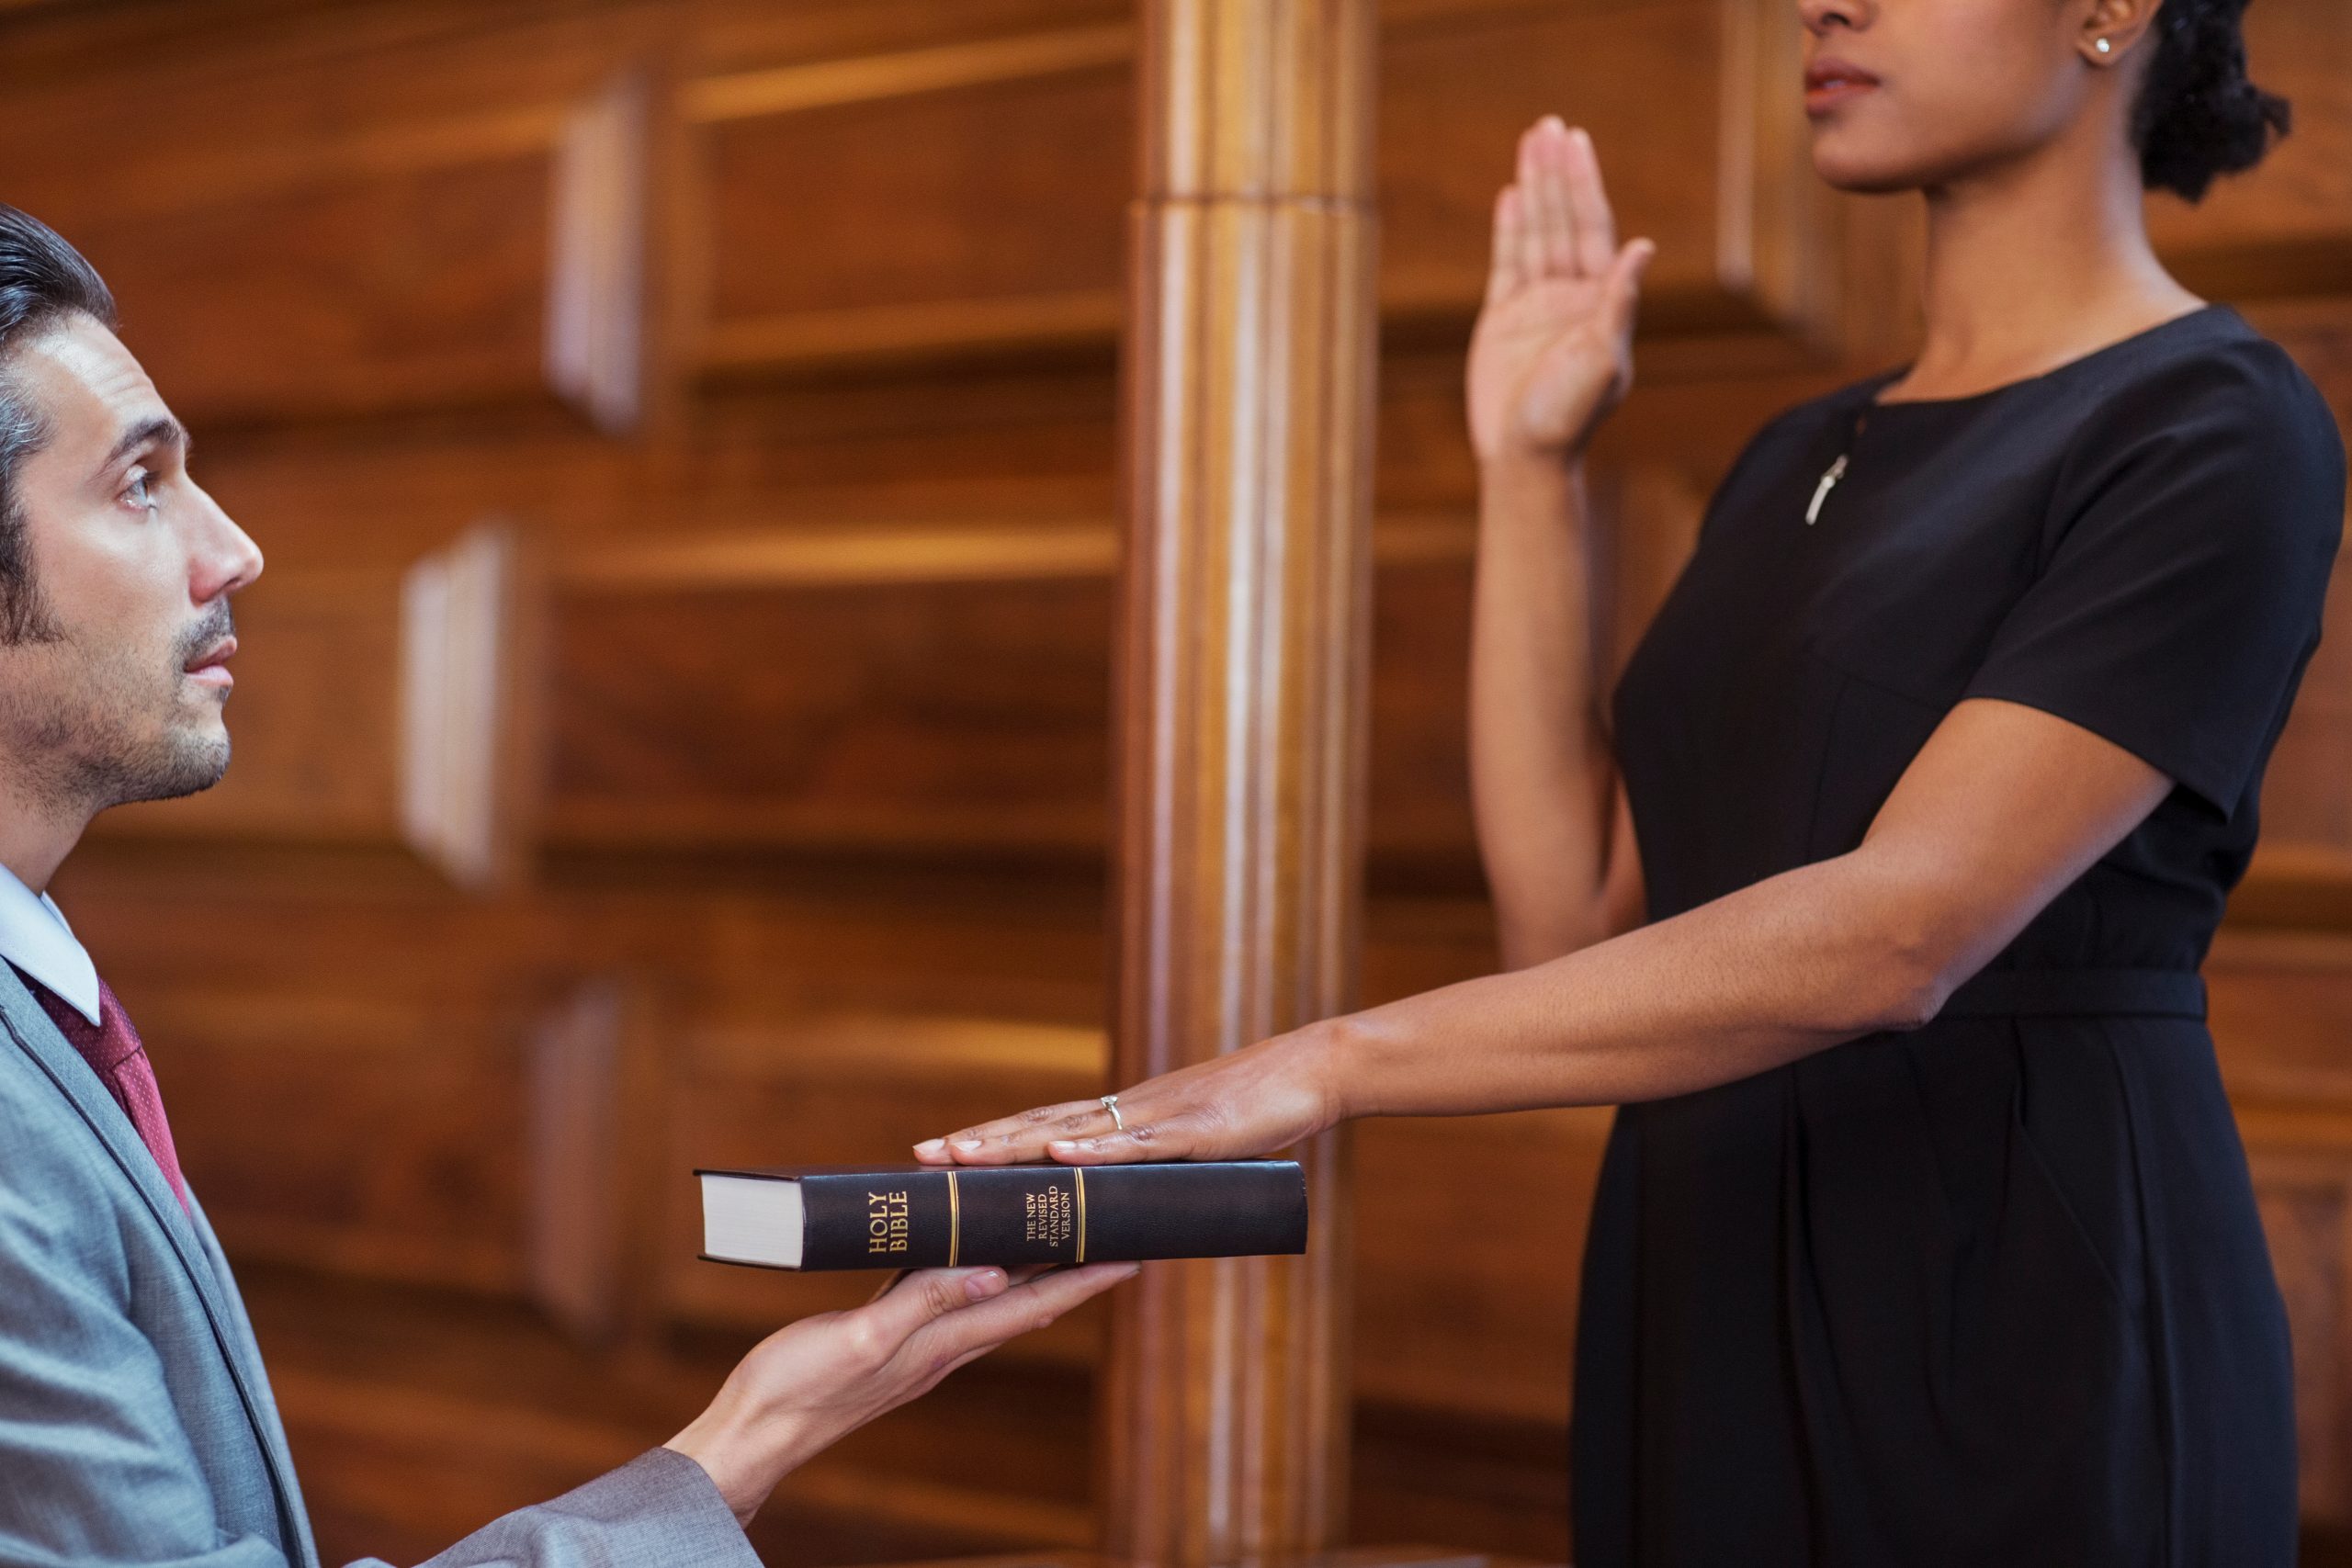 A woman raises her right hand while placing her left hand on a Bible held by a man. The scene takes place in a wood-paneled room, likely a courtroom, indicating an oath or swearing-in ceremony, possibly involving expert witnesses in significant legal cases.